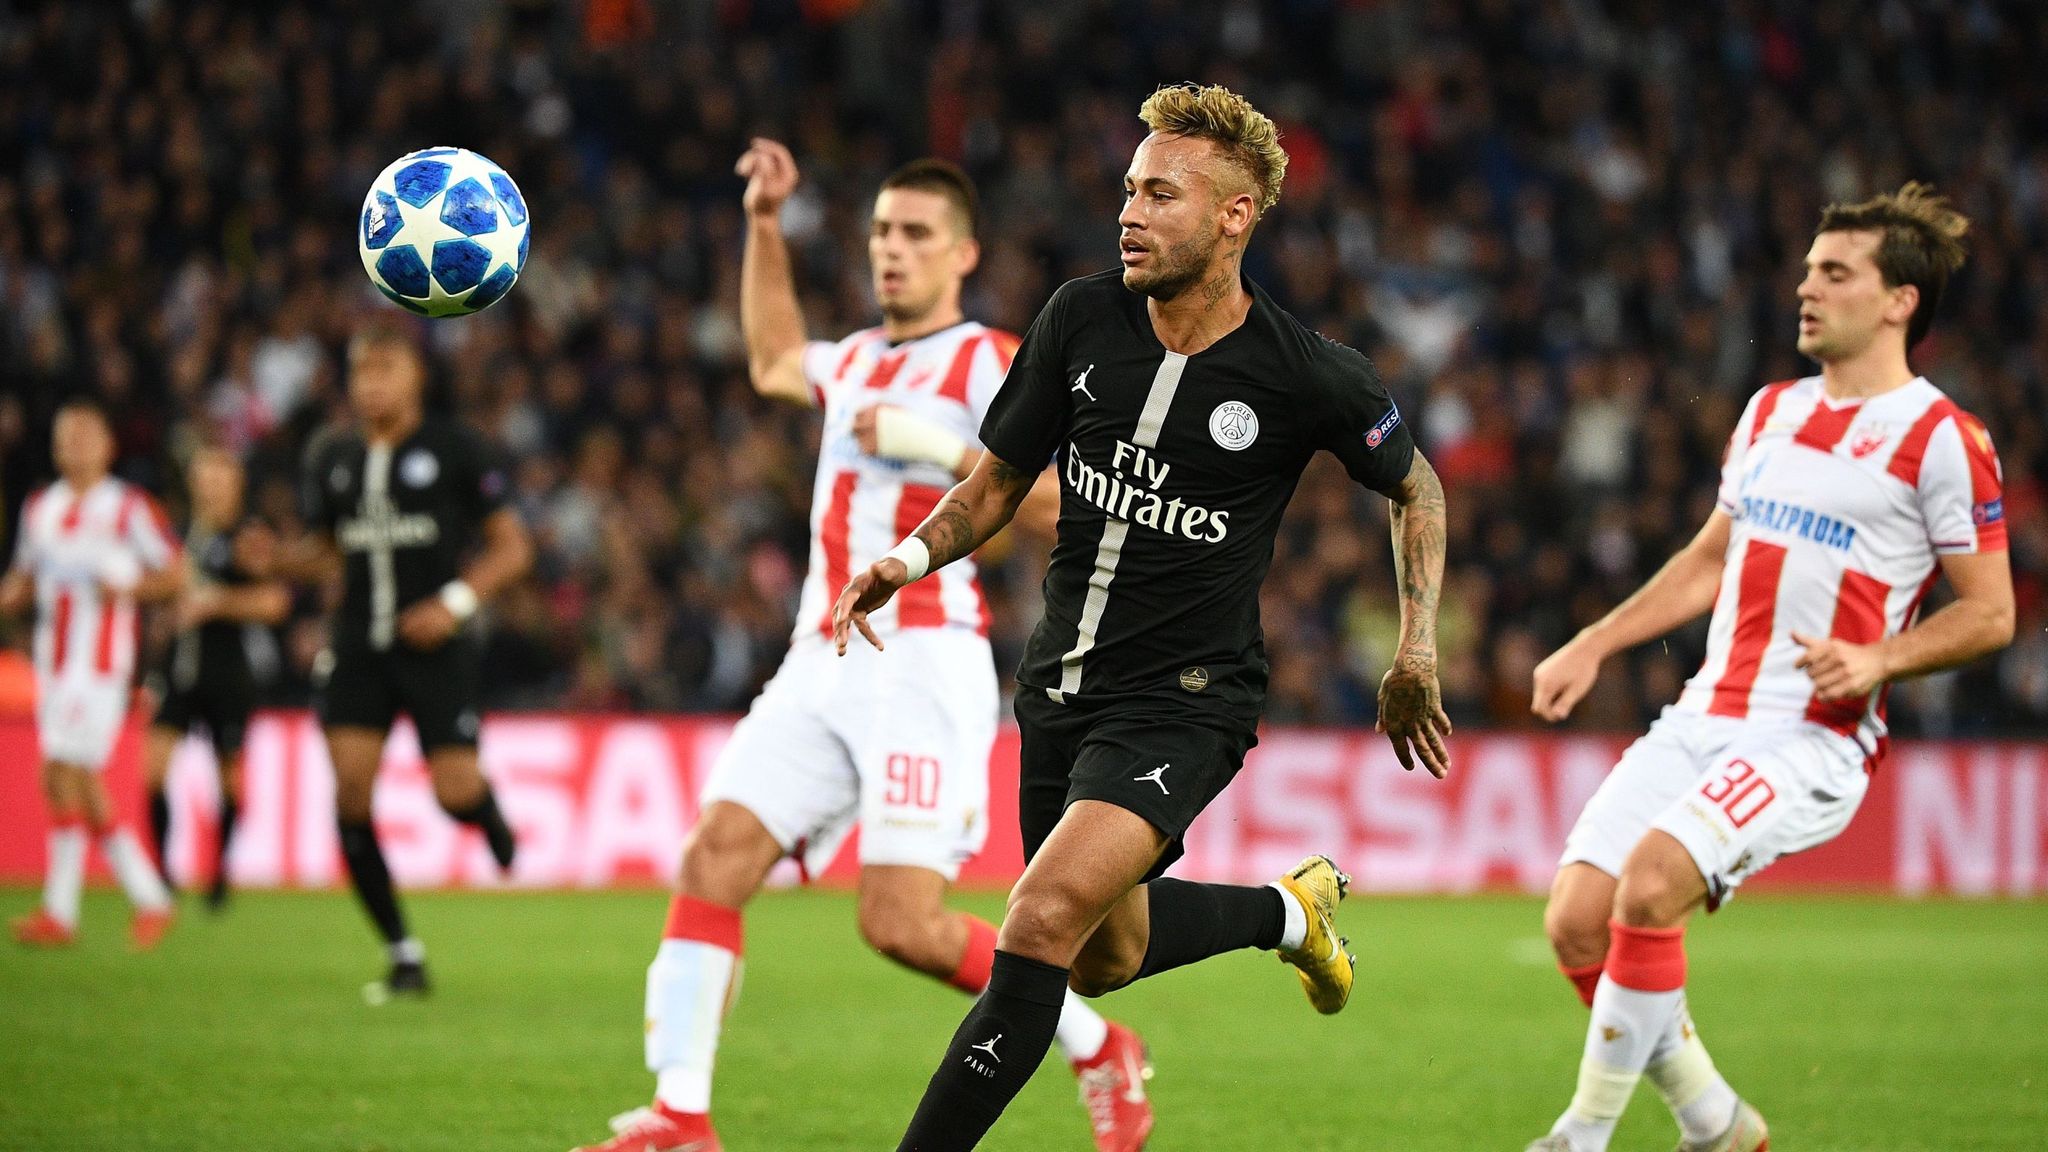 PSG and Red Star deny claims of potential match-fixing in Champions League  game, Football News